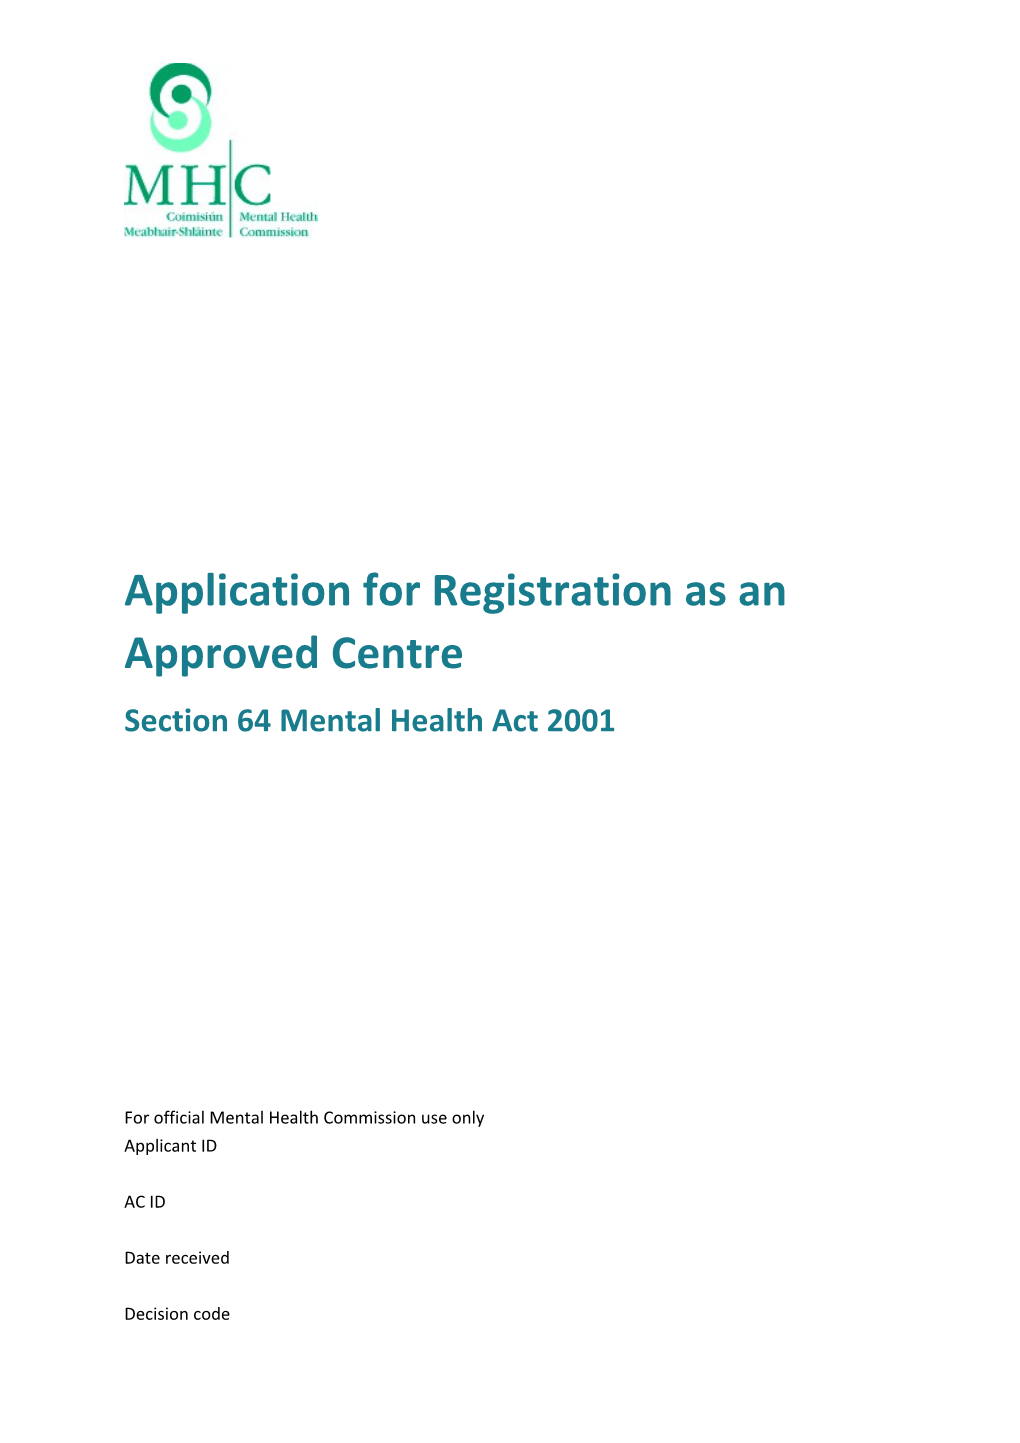 Application for Registration As an Approved Centre